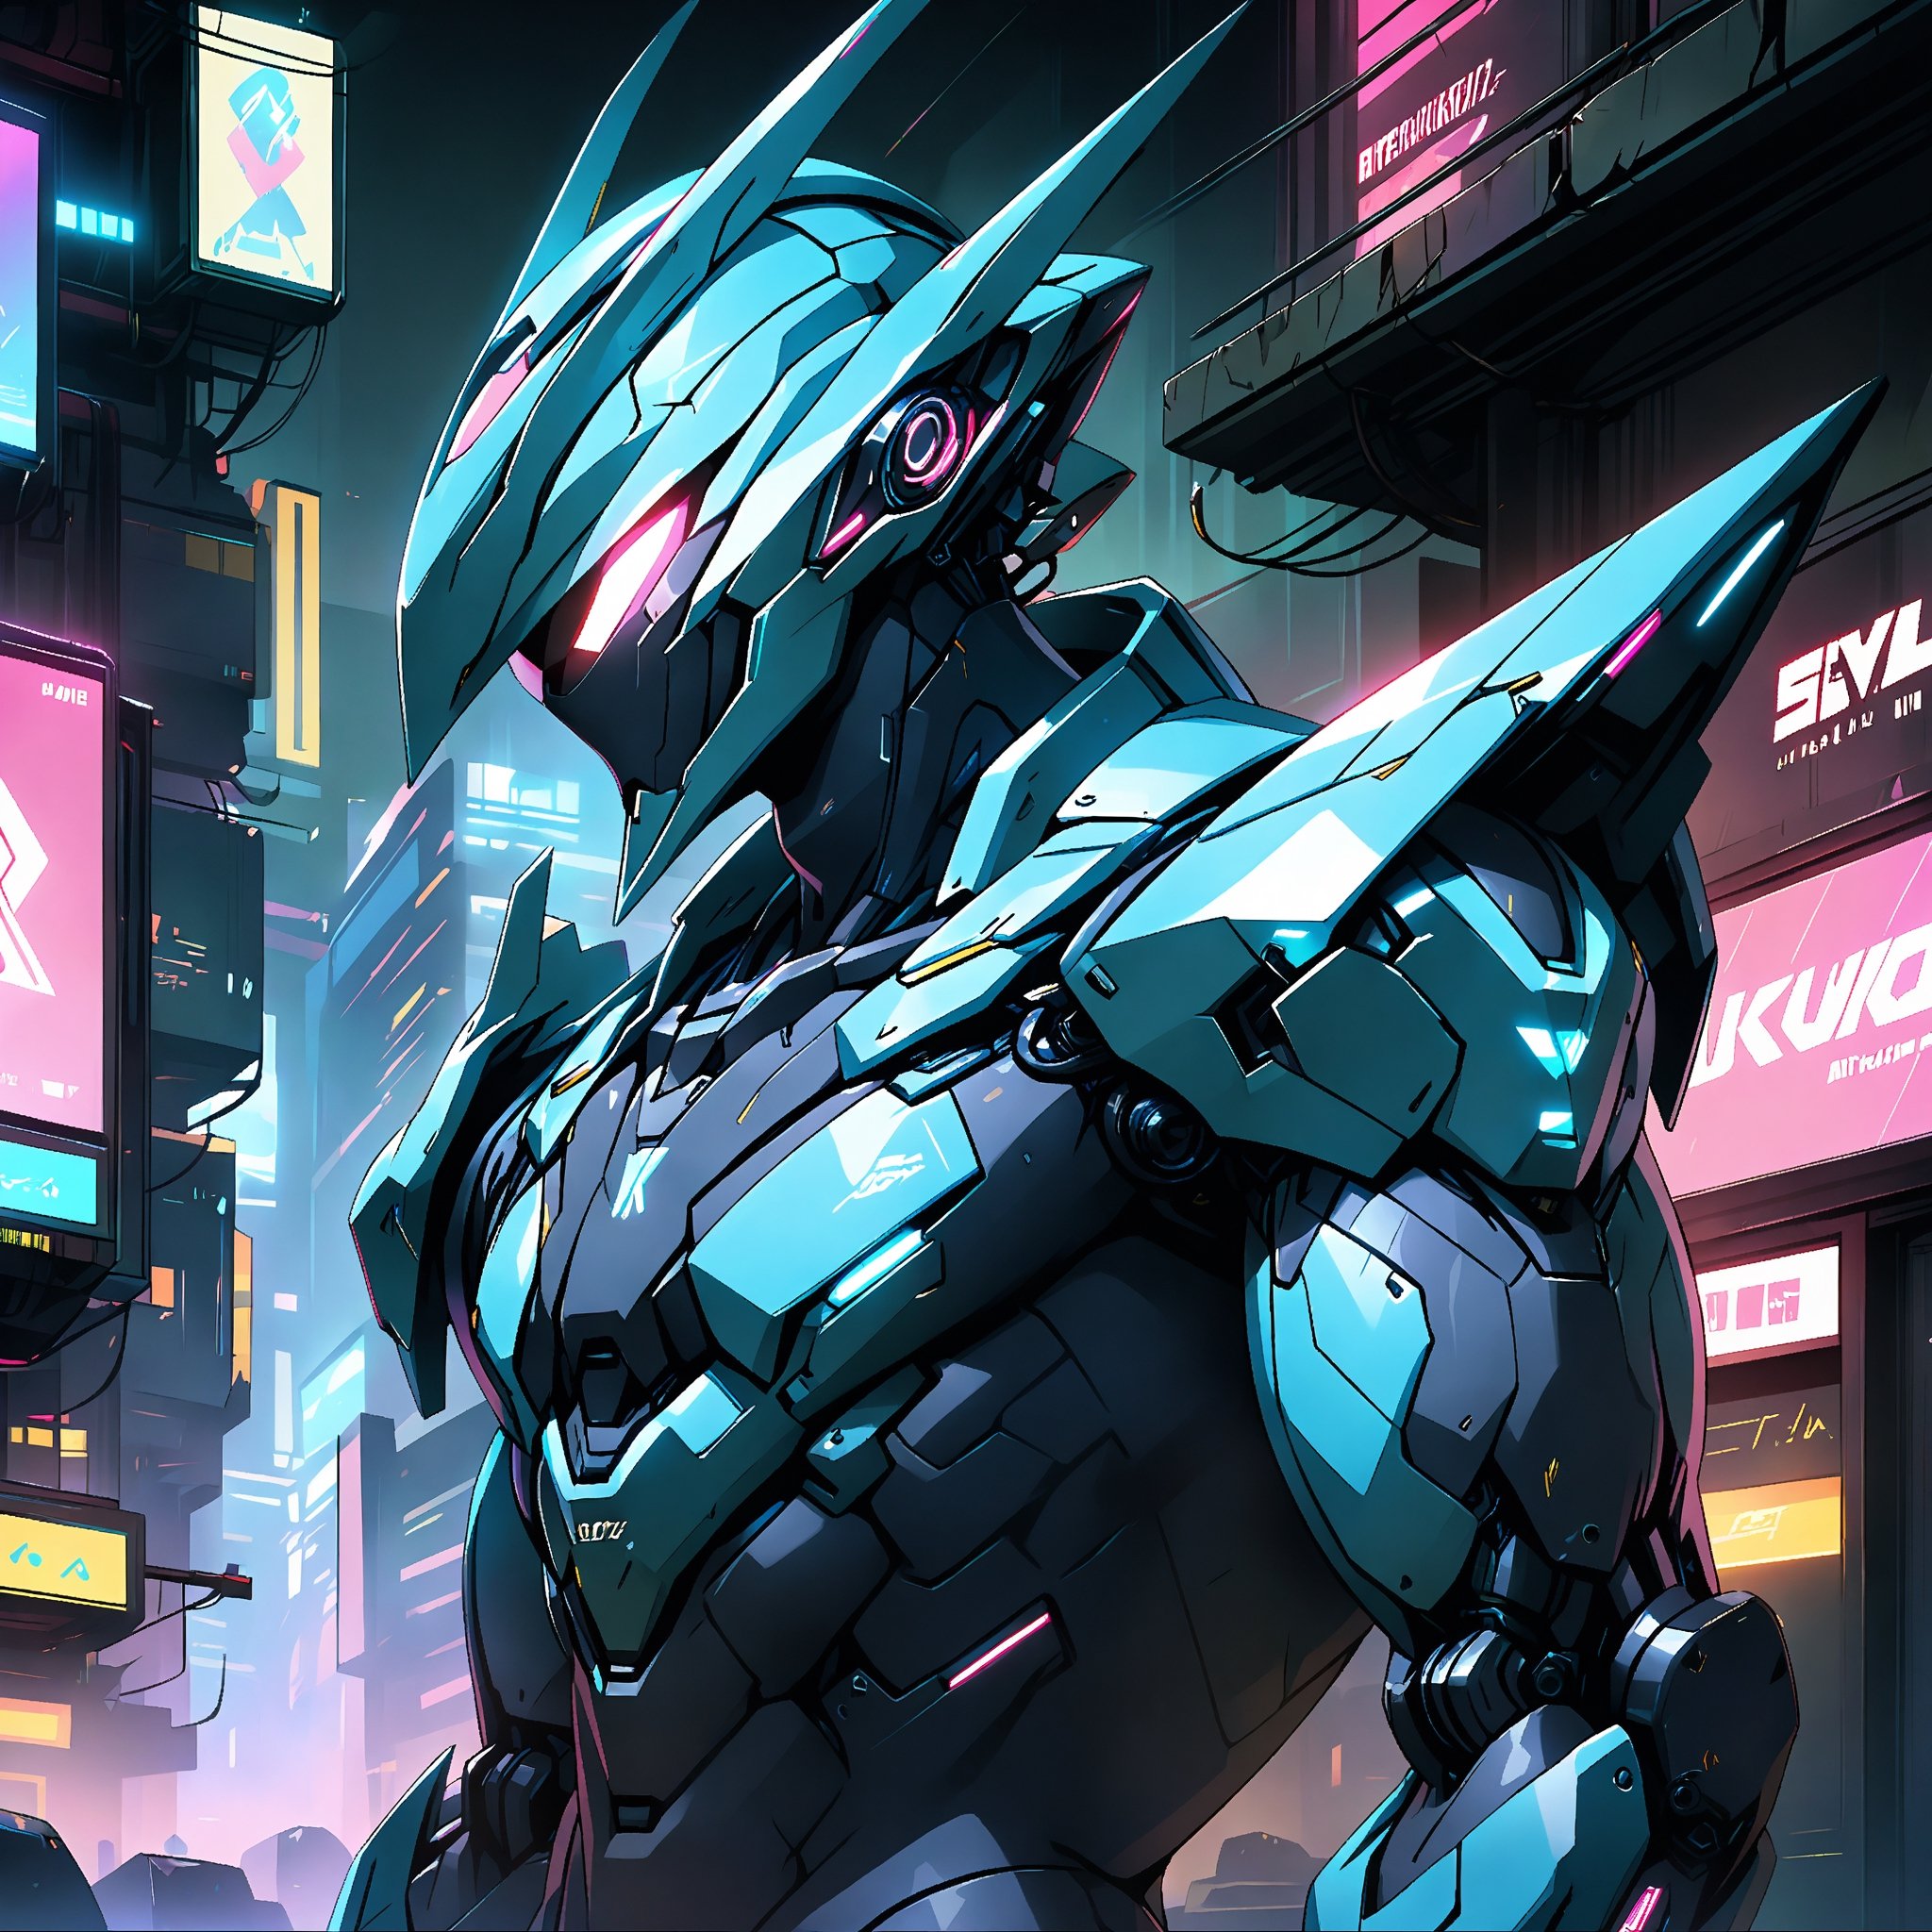 8k, highly detailed, high quality, upper-body_portrait, game cg, anime style, (by Kuroma, by Kurogon)

solo, male. musician, cute robot, shelmet, faceless, no face, toned body, naked, almost_naked,

BREAK

cyberpunk style, cyber city